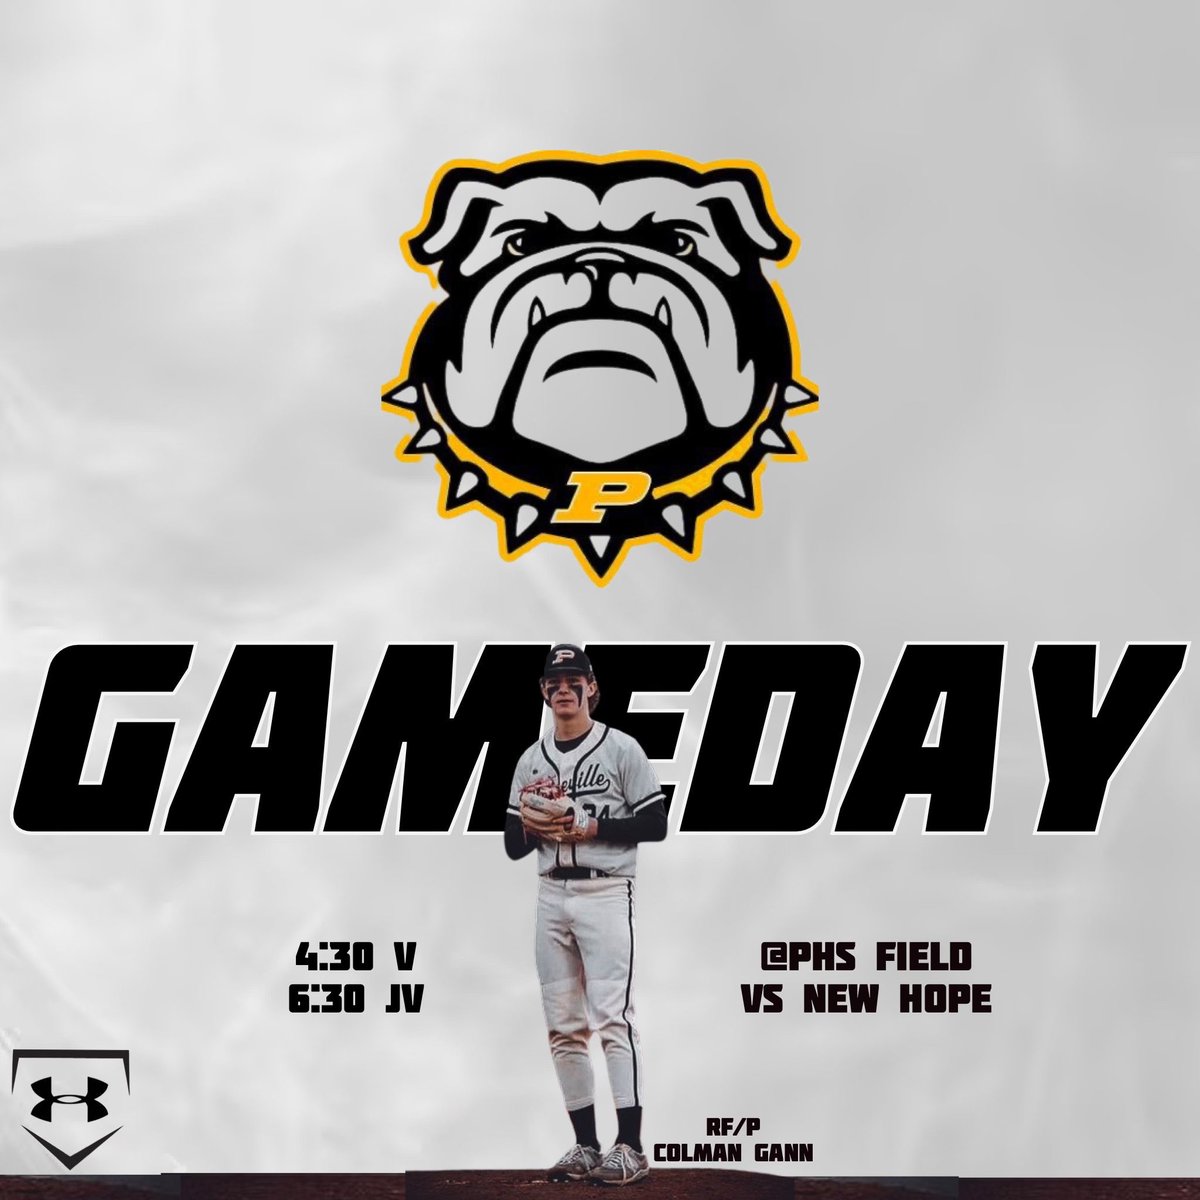 Bulldogs at home today! PHS students get free admission. Come fill the porch! 